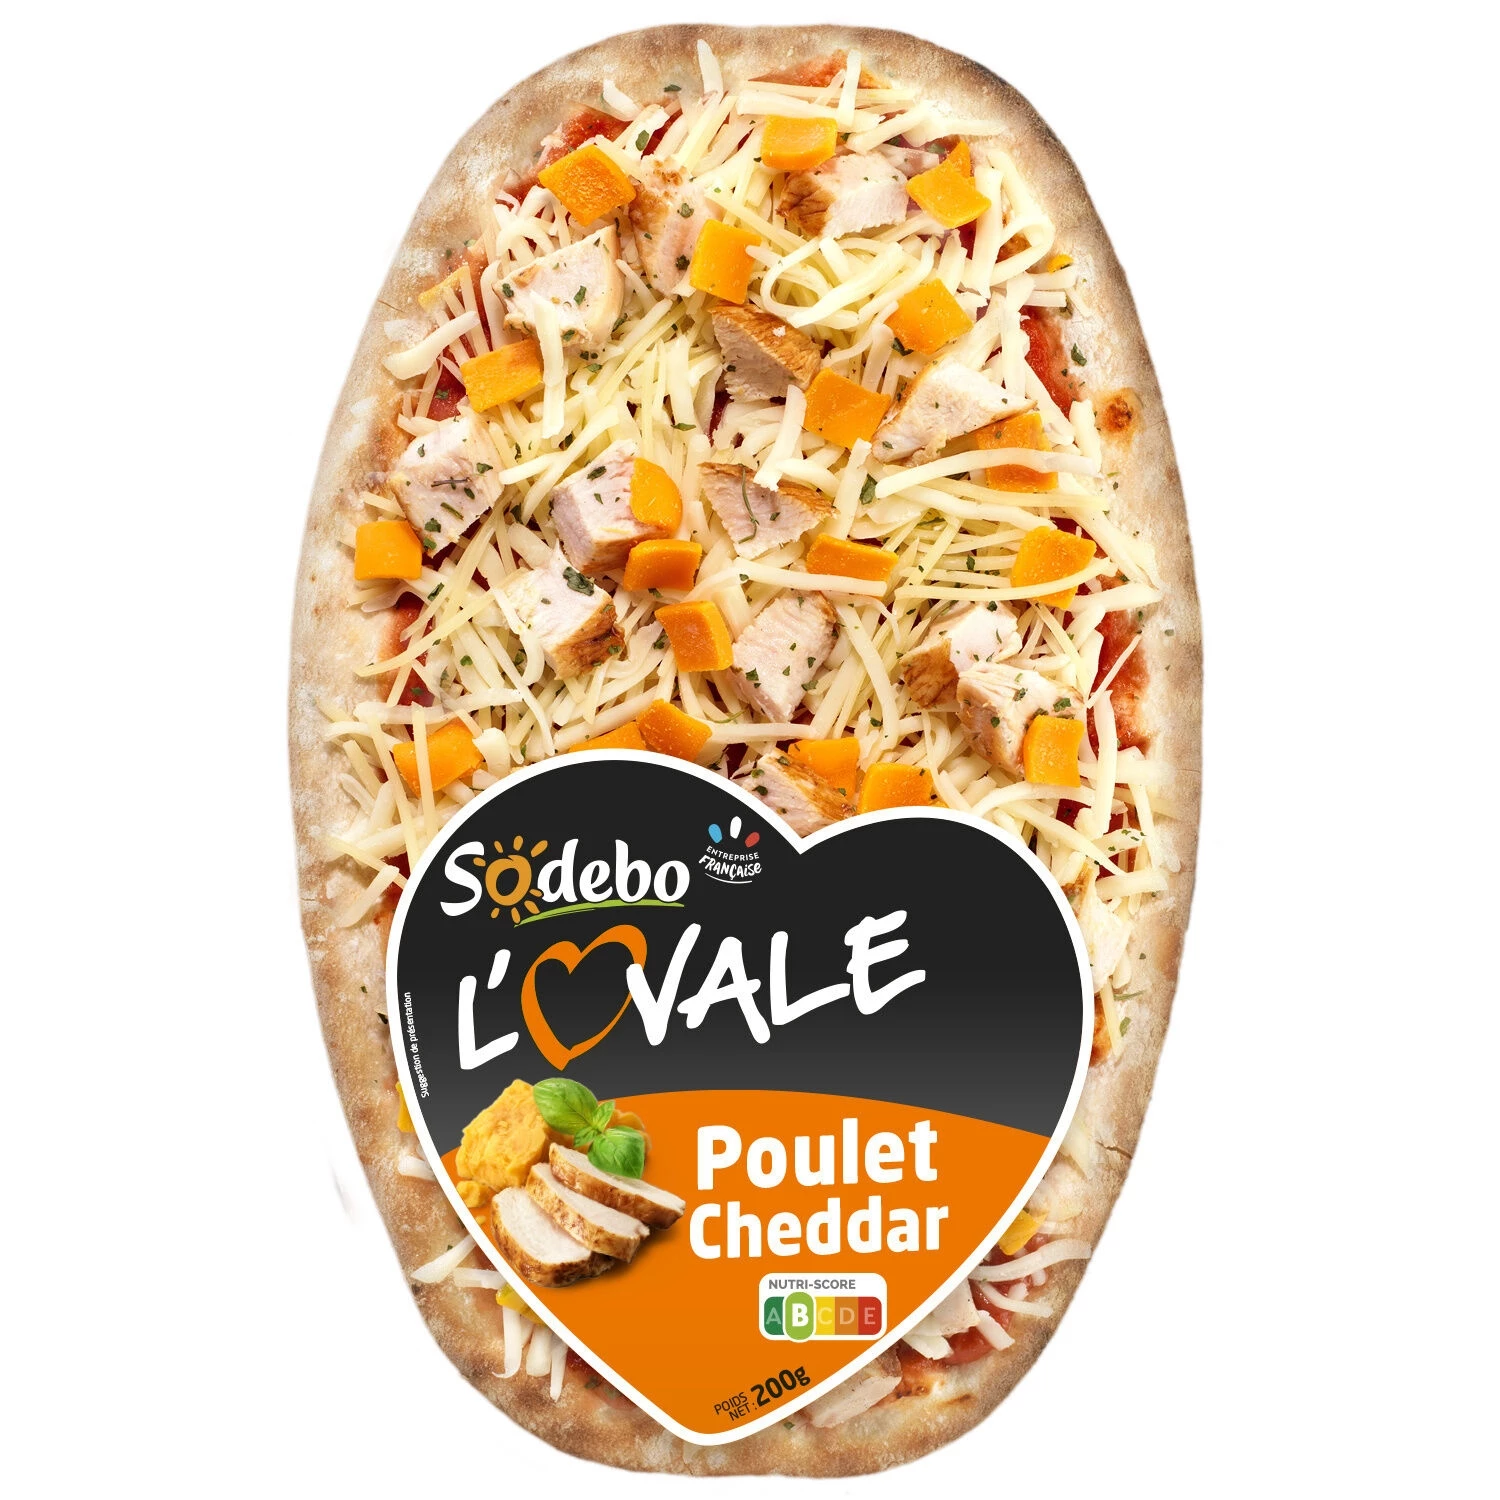 200g Pizza Ovale Plt Ched Sbo